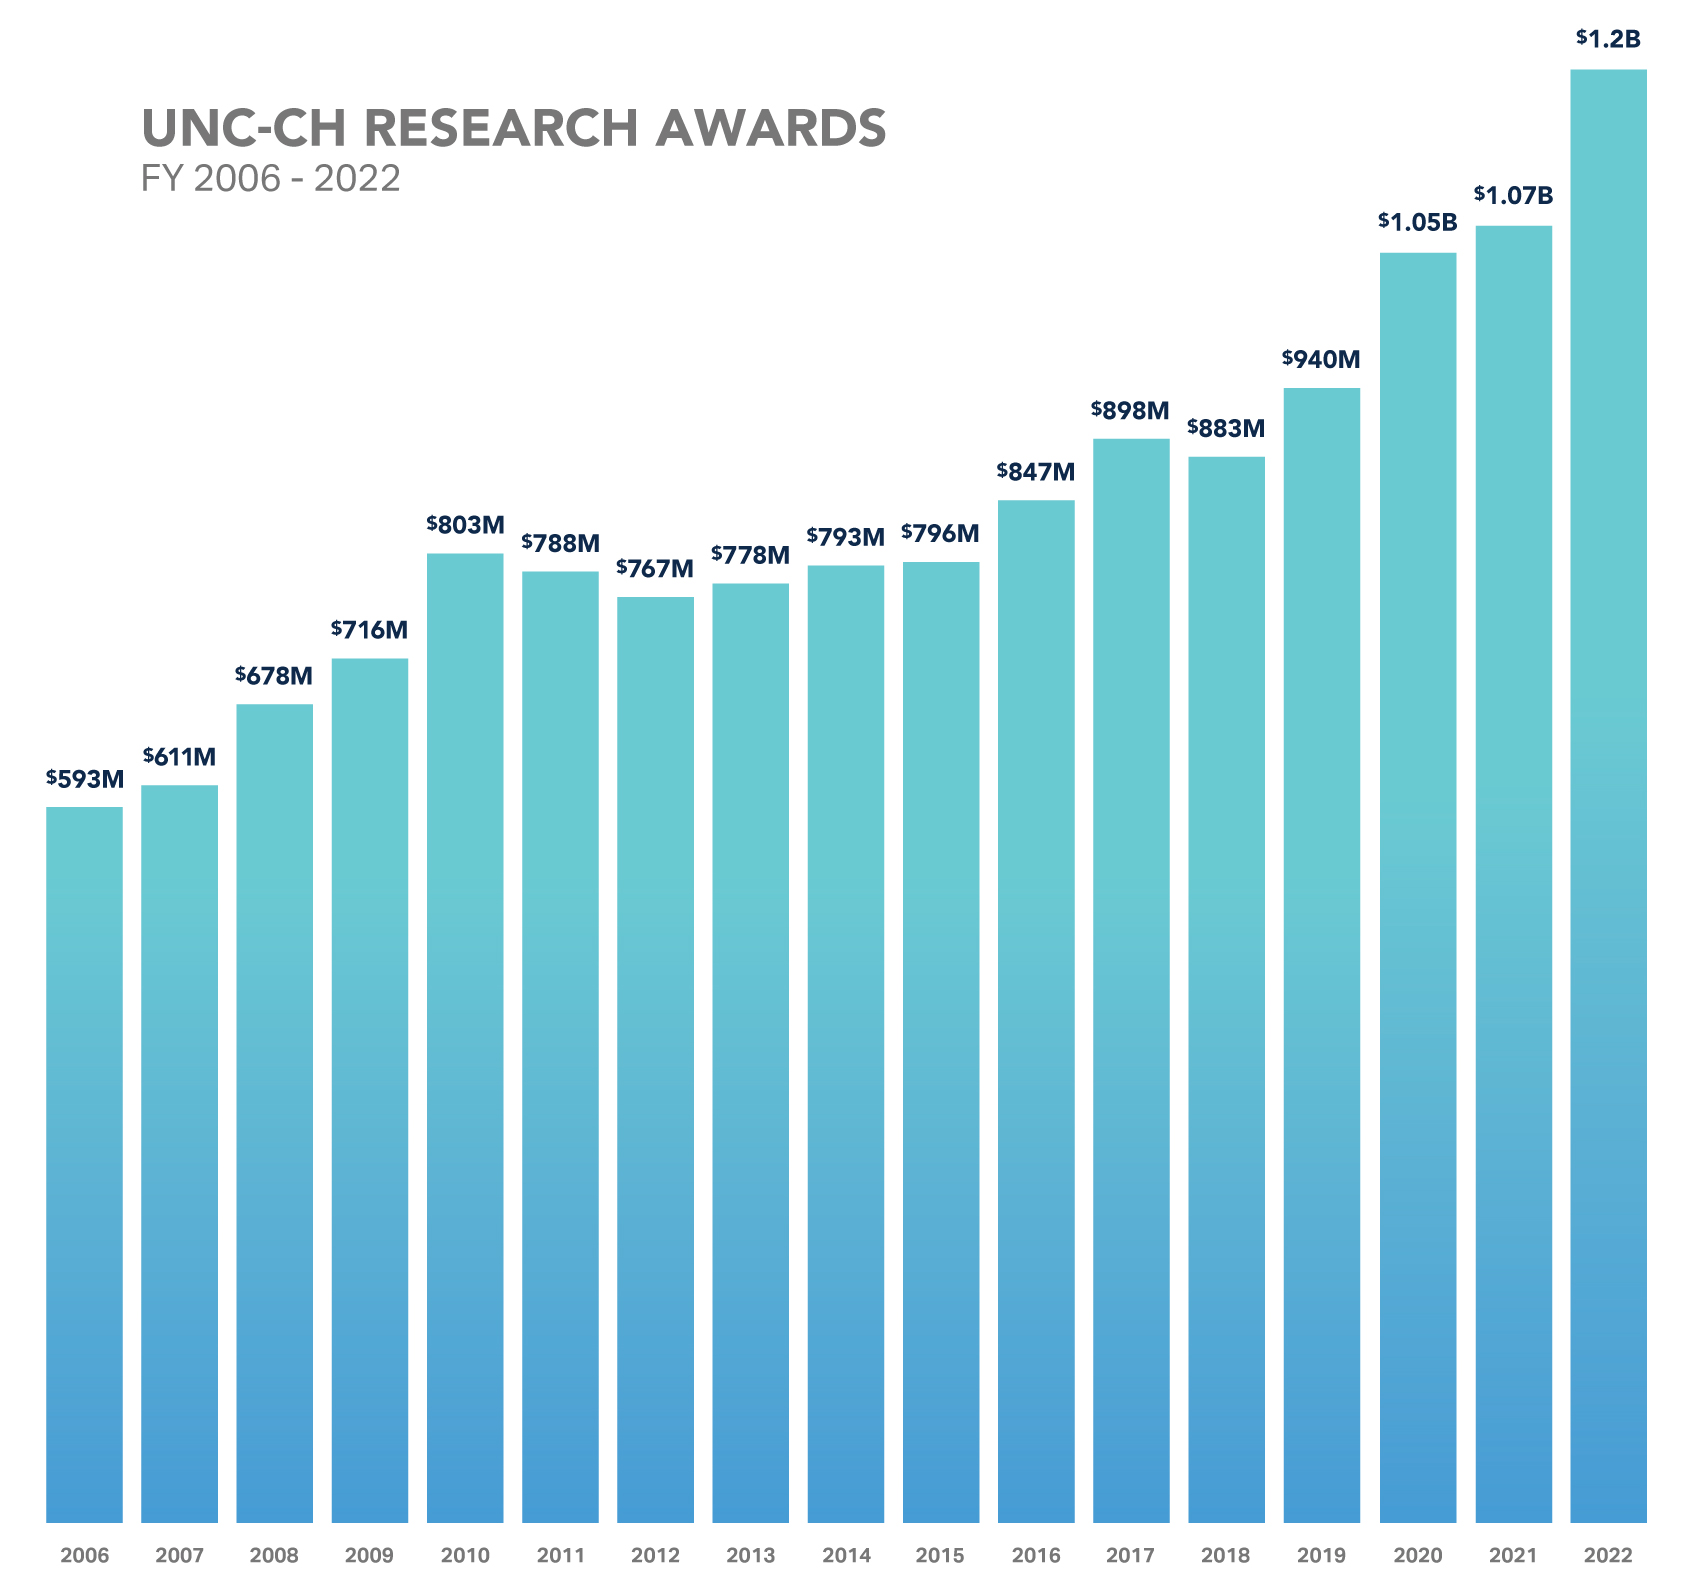 UNC at Chapel Hill's Research Awards from 2006 to 2021. In 2006, awarded 593 million dollars. In 2007, awarded 611 million dollars. In 2008, awarded 678 million dollars. In 2009, awarded 716 million dollars. In 2010, awarded 803 million dollars. In 2011, awarded 788 million dollars. In 2012, awarded 767 million dollars. In 2013, awarded 778 million dollars. In 2014, awarded 793 million dollars. In 2015, awarded 796 million dollars. In 2016, awarded 847 million dollars. In 2017, awarded 898 million dollars. In 2018, awarded 883 million dollars. In 2019, awarded 940 million dollars. In 2020, awarded 1.05 billion dollars. In 2021, awarded 1.07 billion dollars. In 2022, awards 1.2 billion dollars.